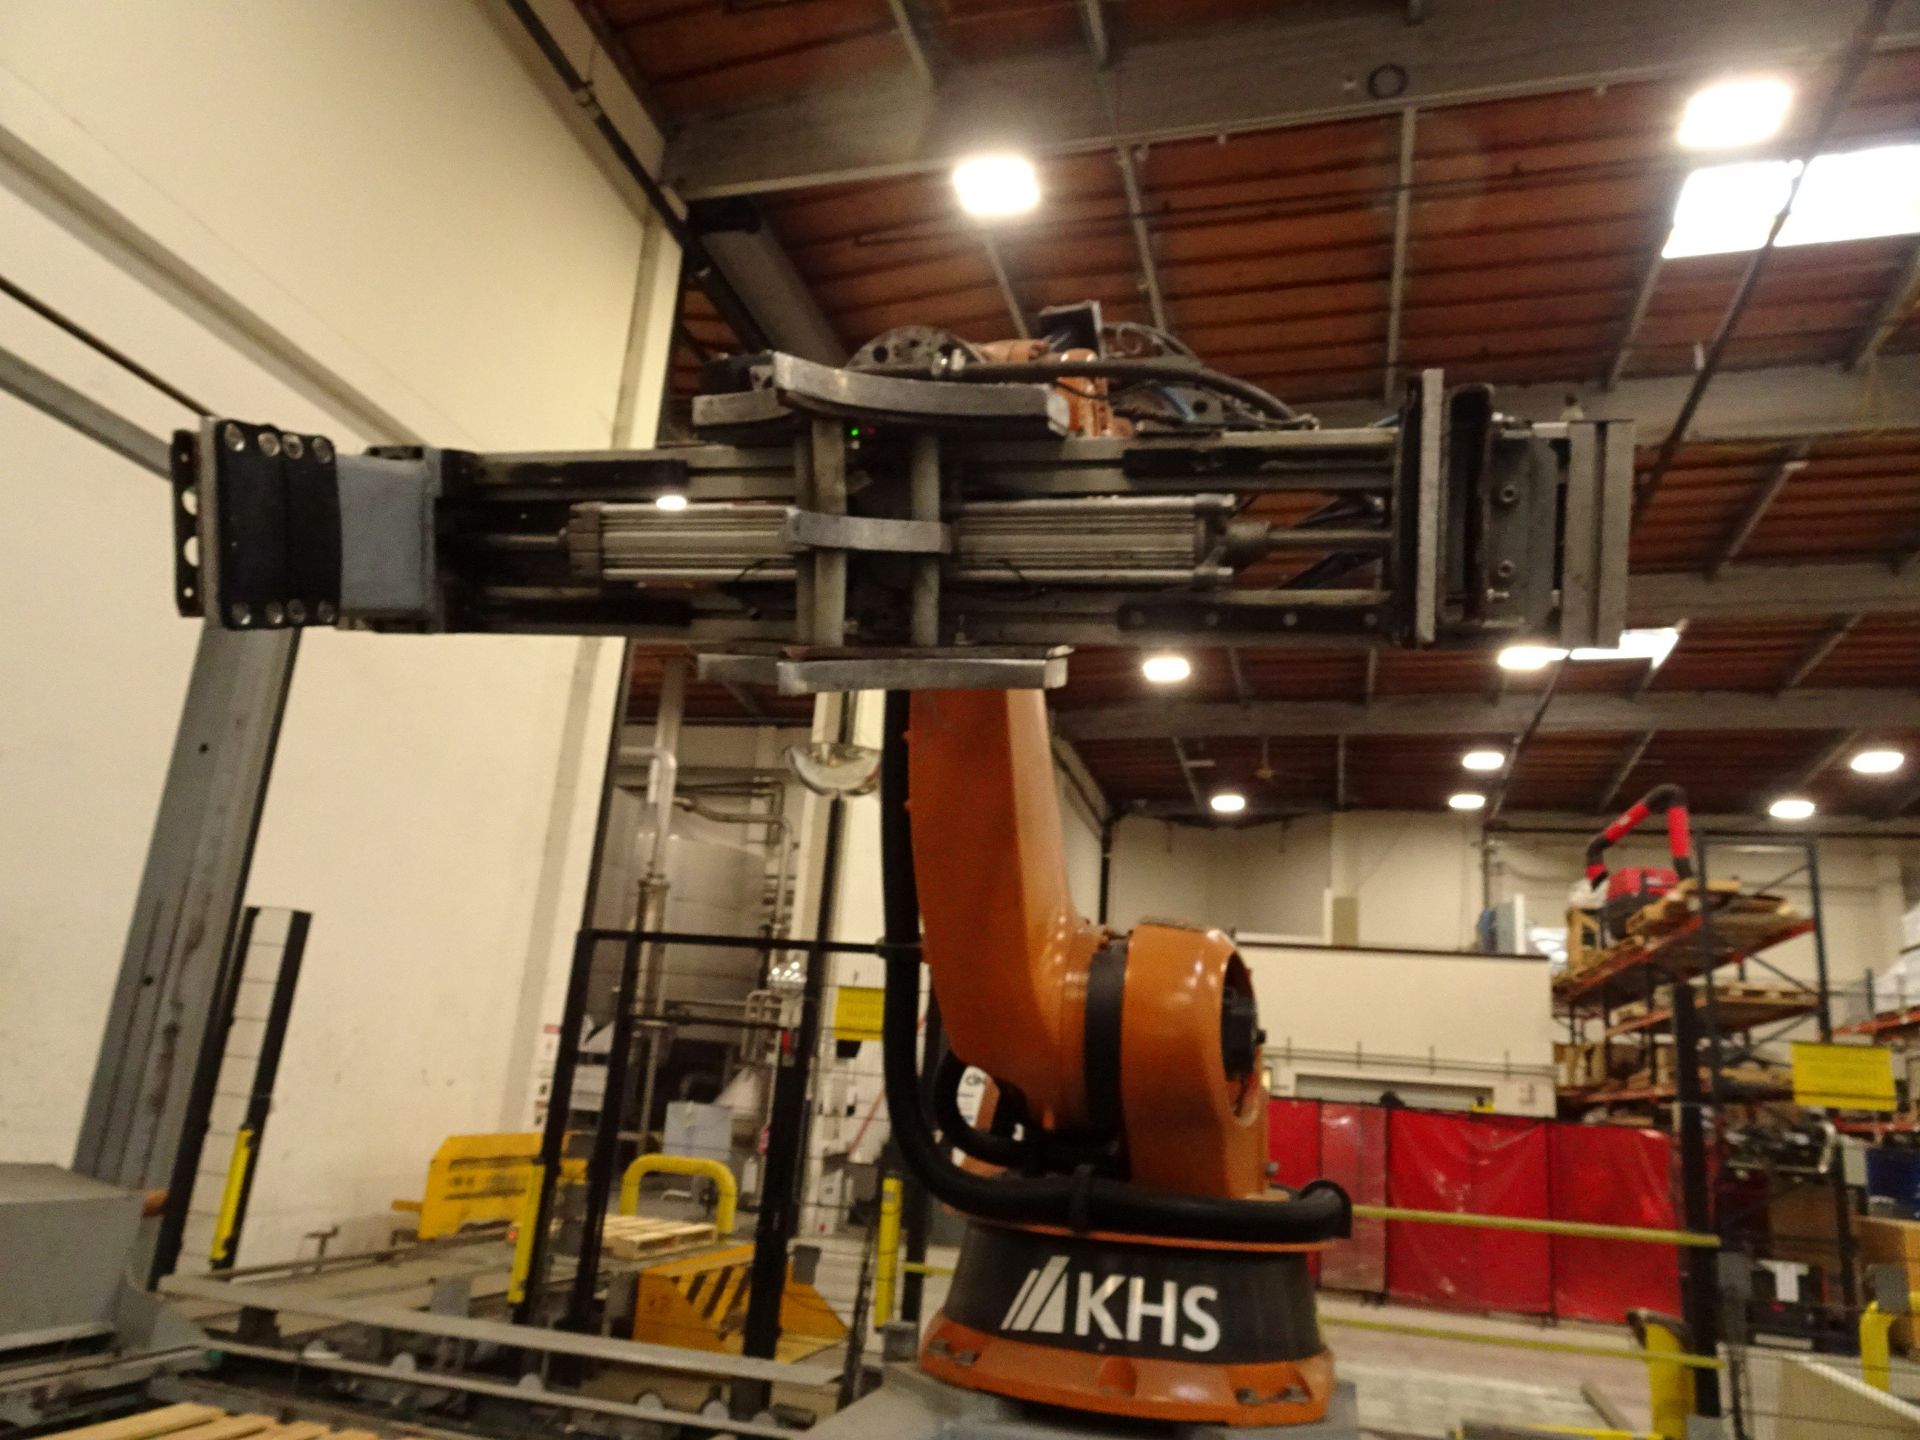 2006 Kuka/KHS Robot Palletizing Cell For Kegs, Palletizing Cell Setup For Destackin - Contact Rigger - Image 64 of 70